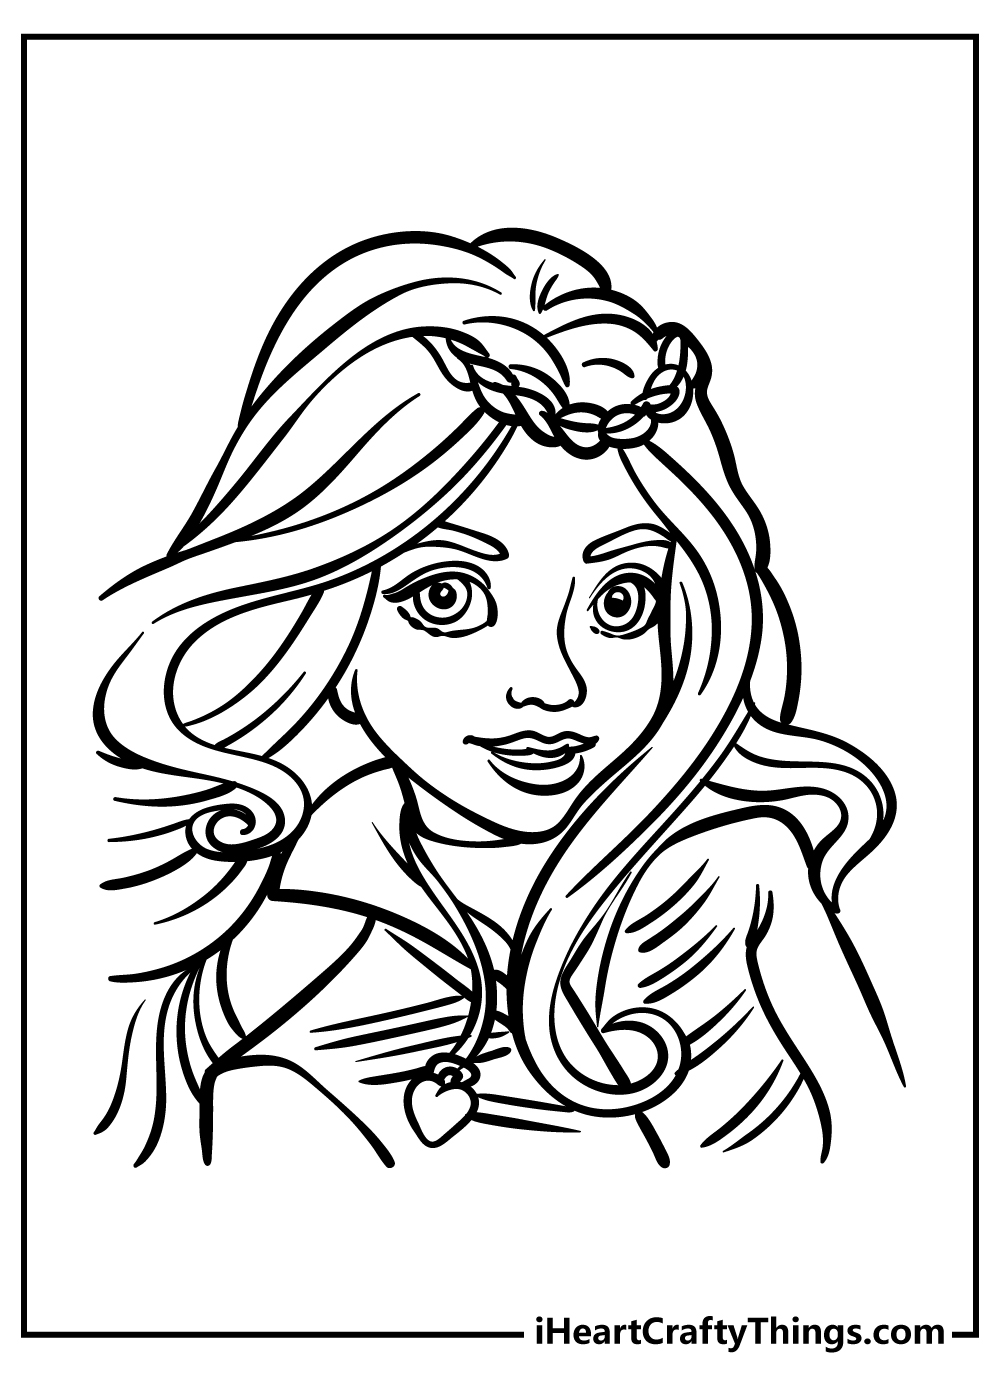 Descendants Coloring Pages for kids free download